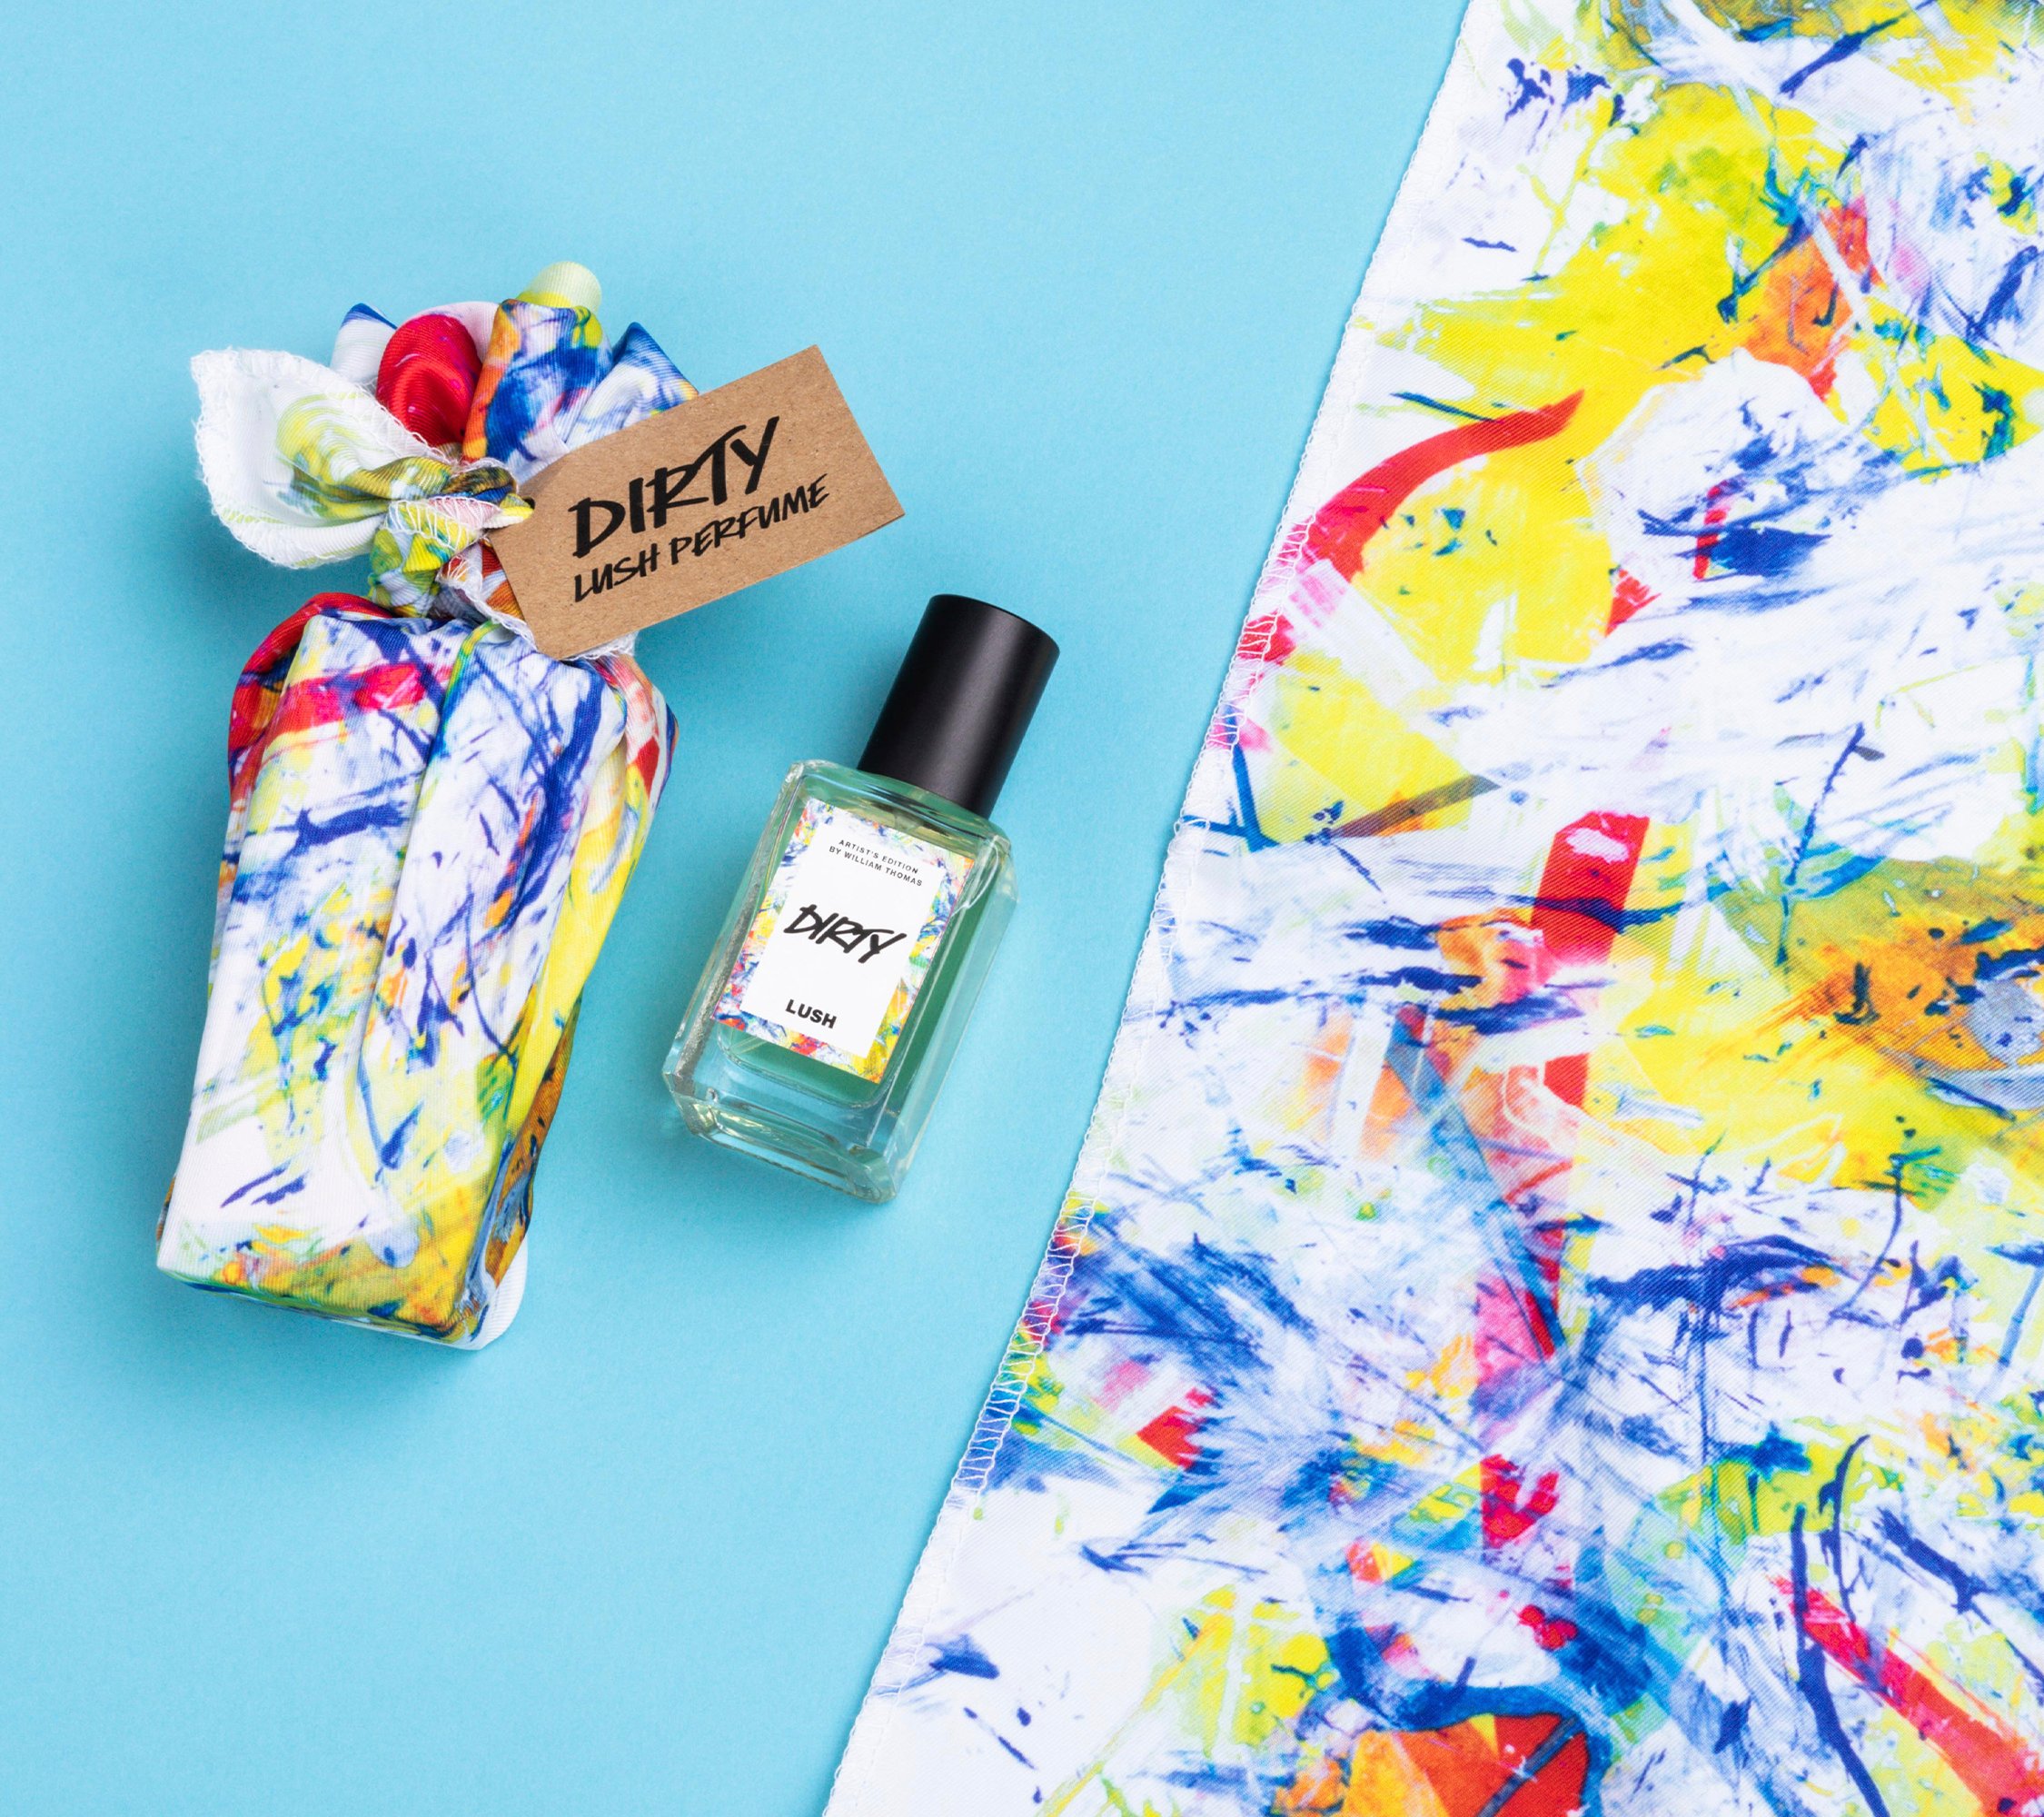 Dirty lies on a light blue background, alongside its two elements: a small bottle of Dirty perfume and a colourful knot wrap.